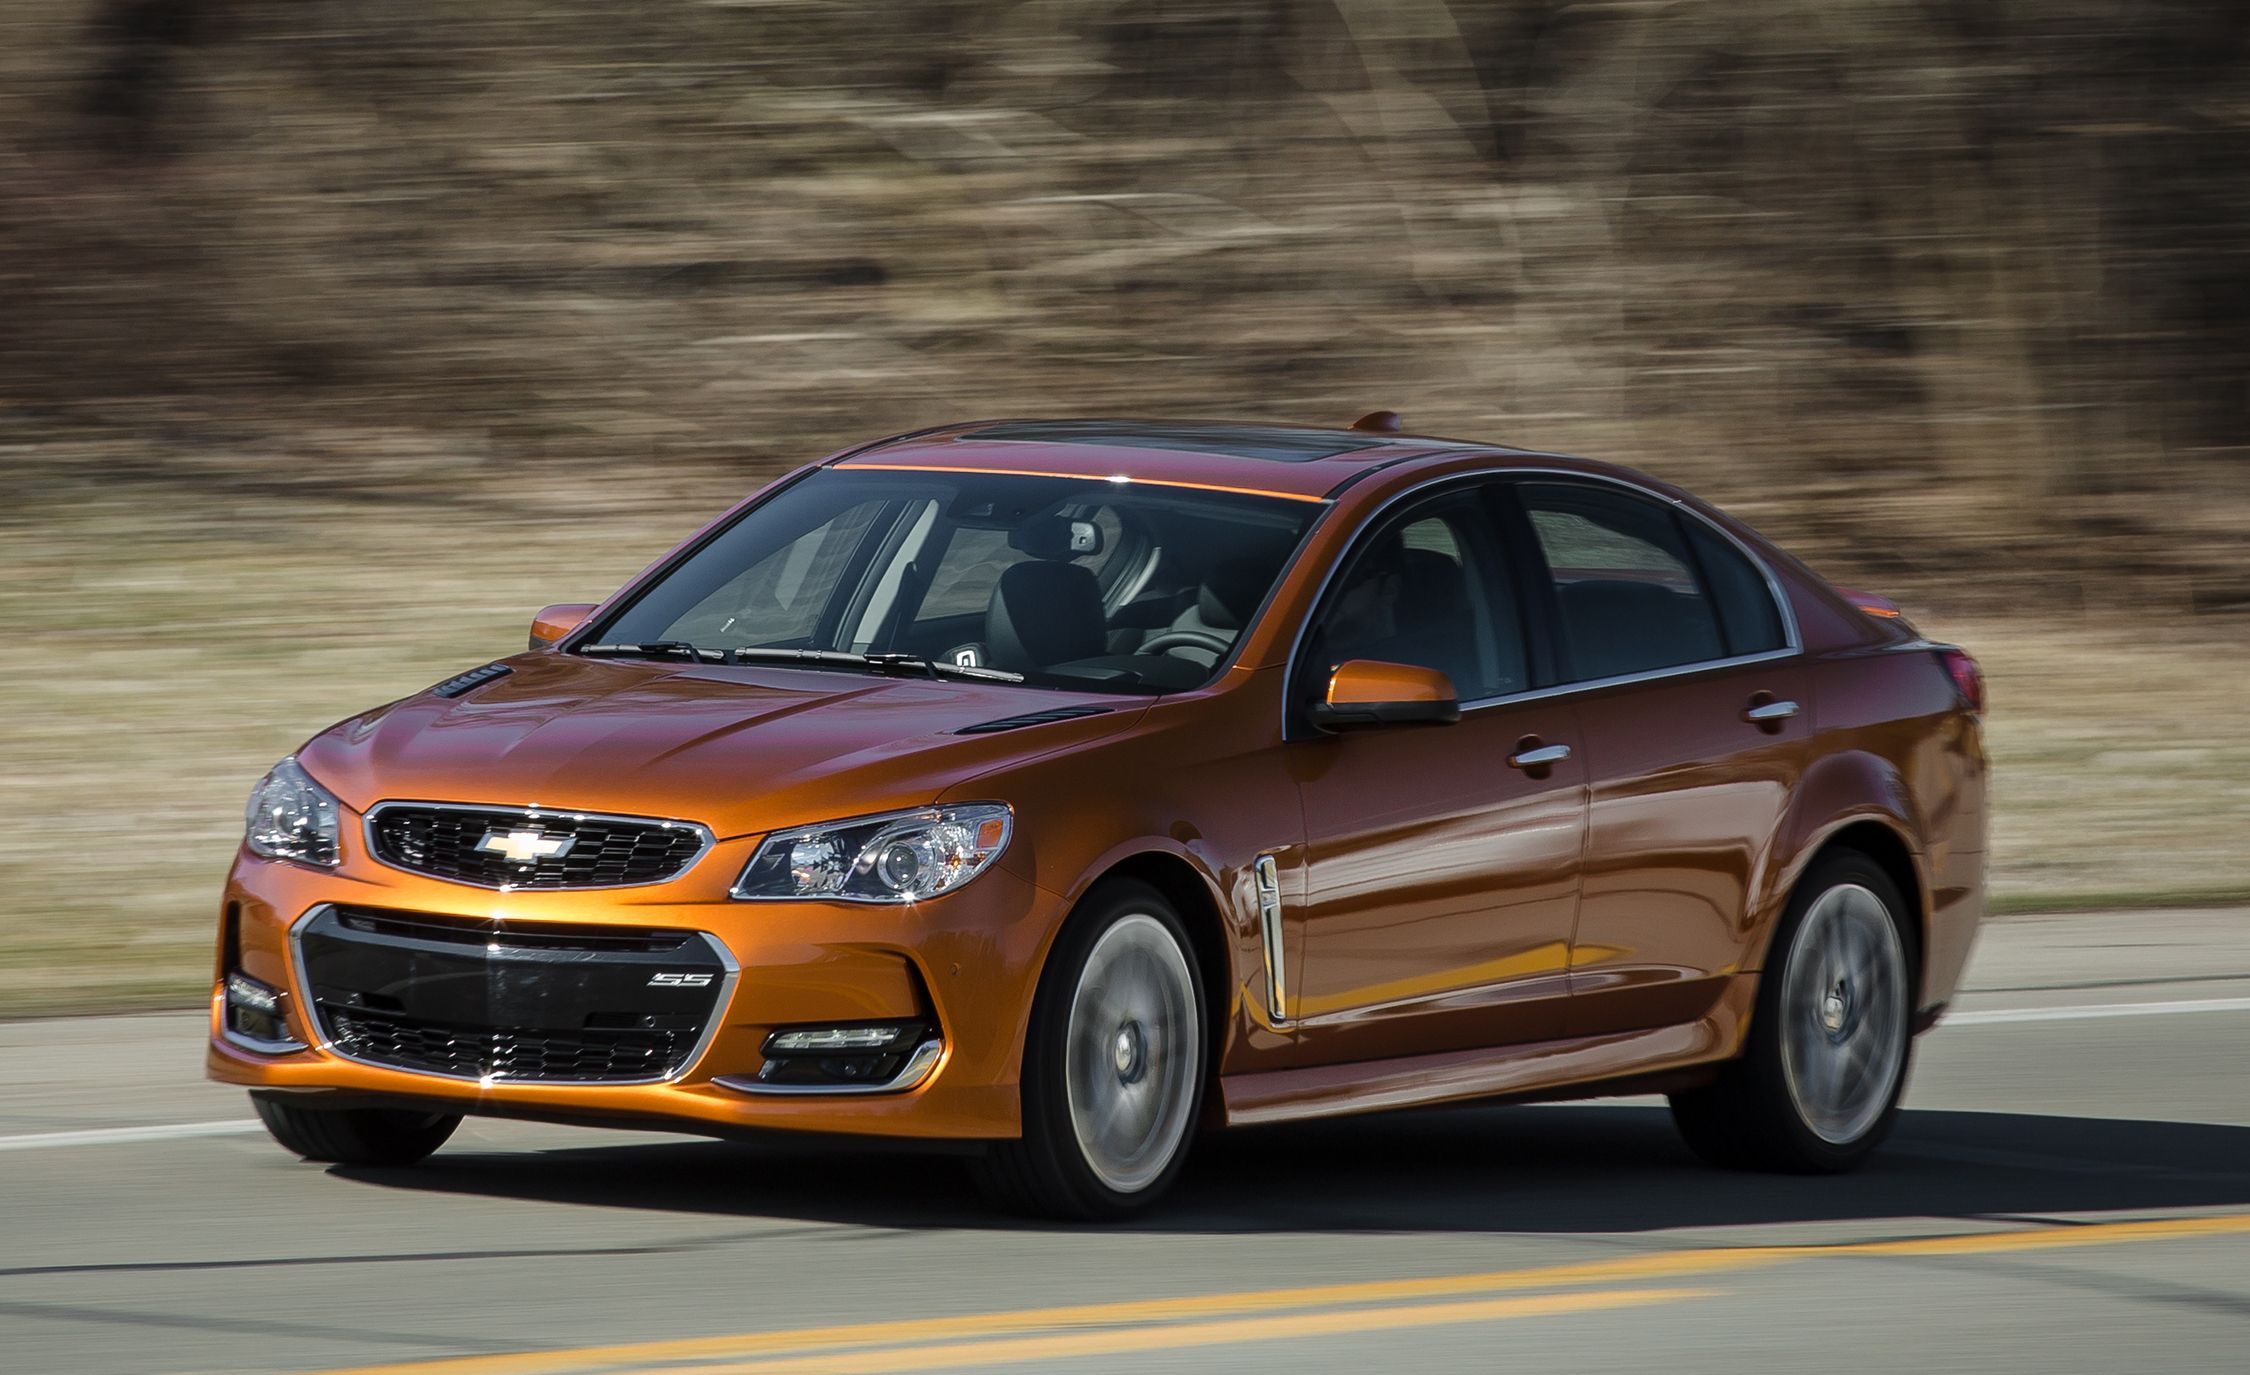 2017 Chevrolet Ss Manual Instrumented Test Review Car And Driver